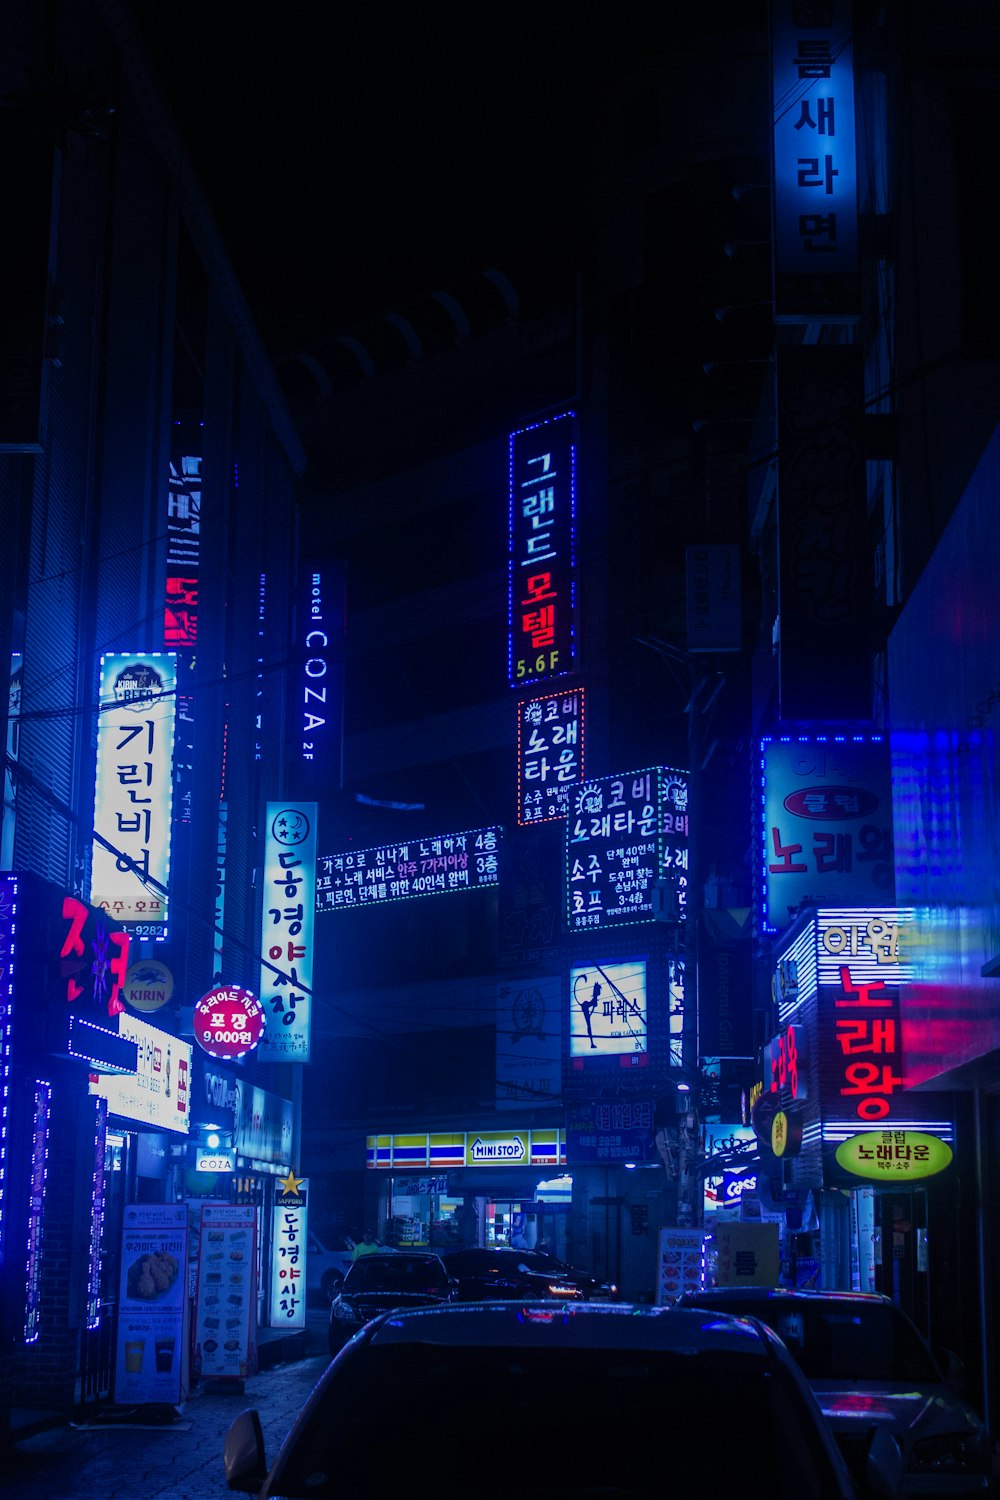 Blue Neon Light Pictures Download Free Images On Unsplash